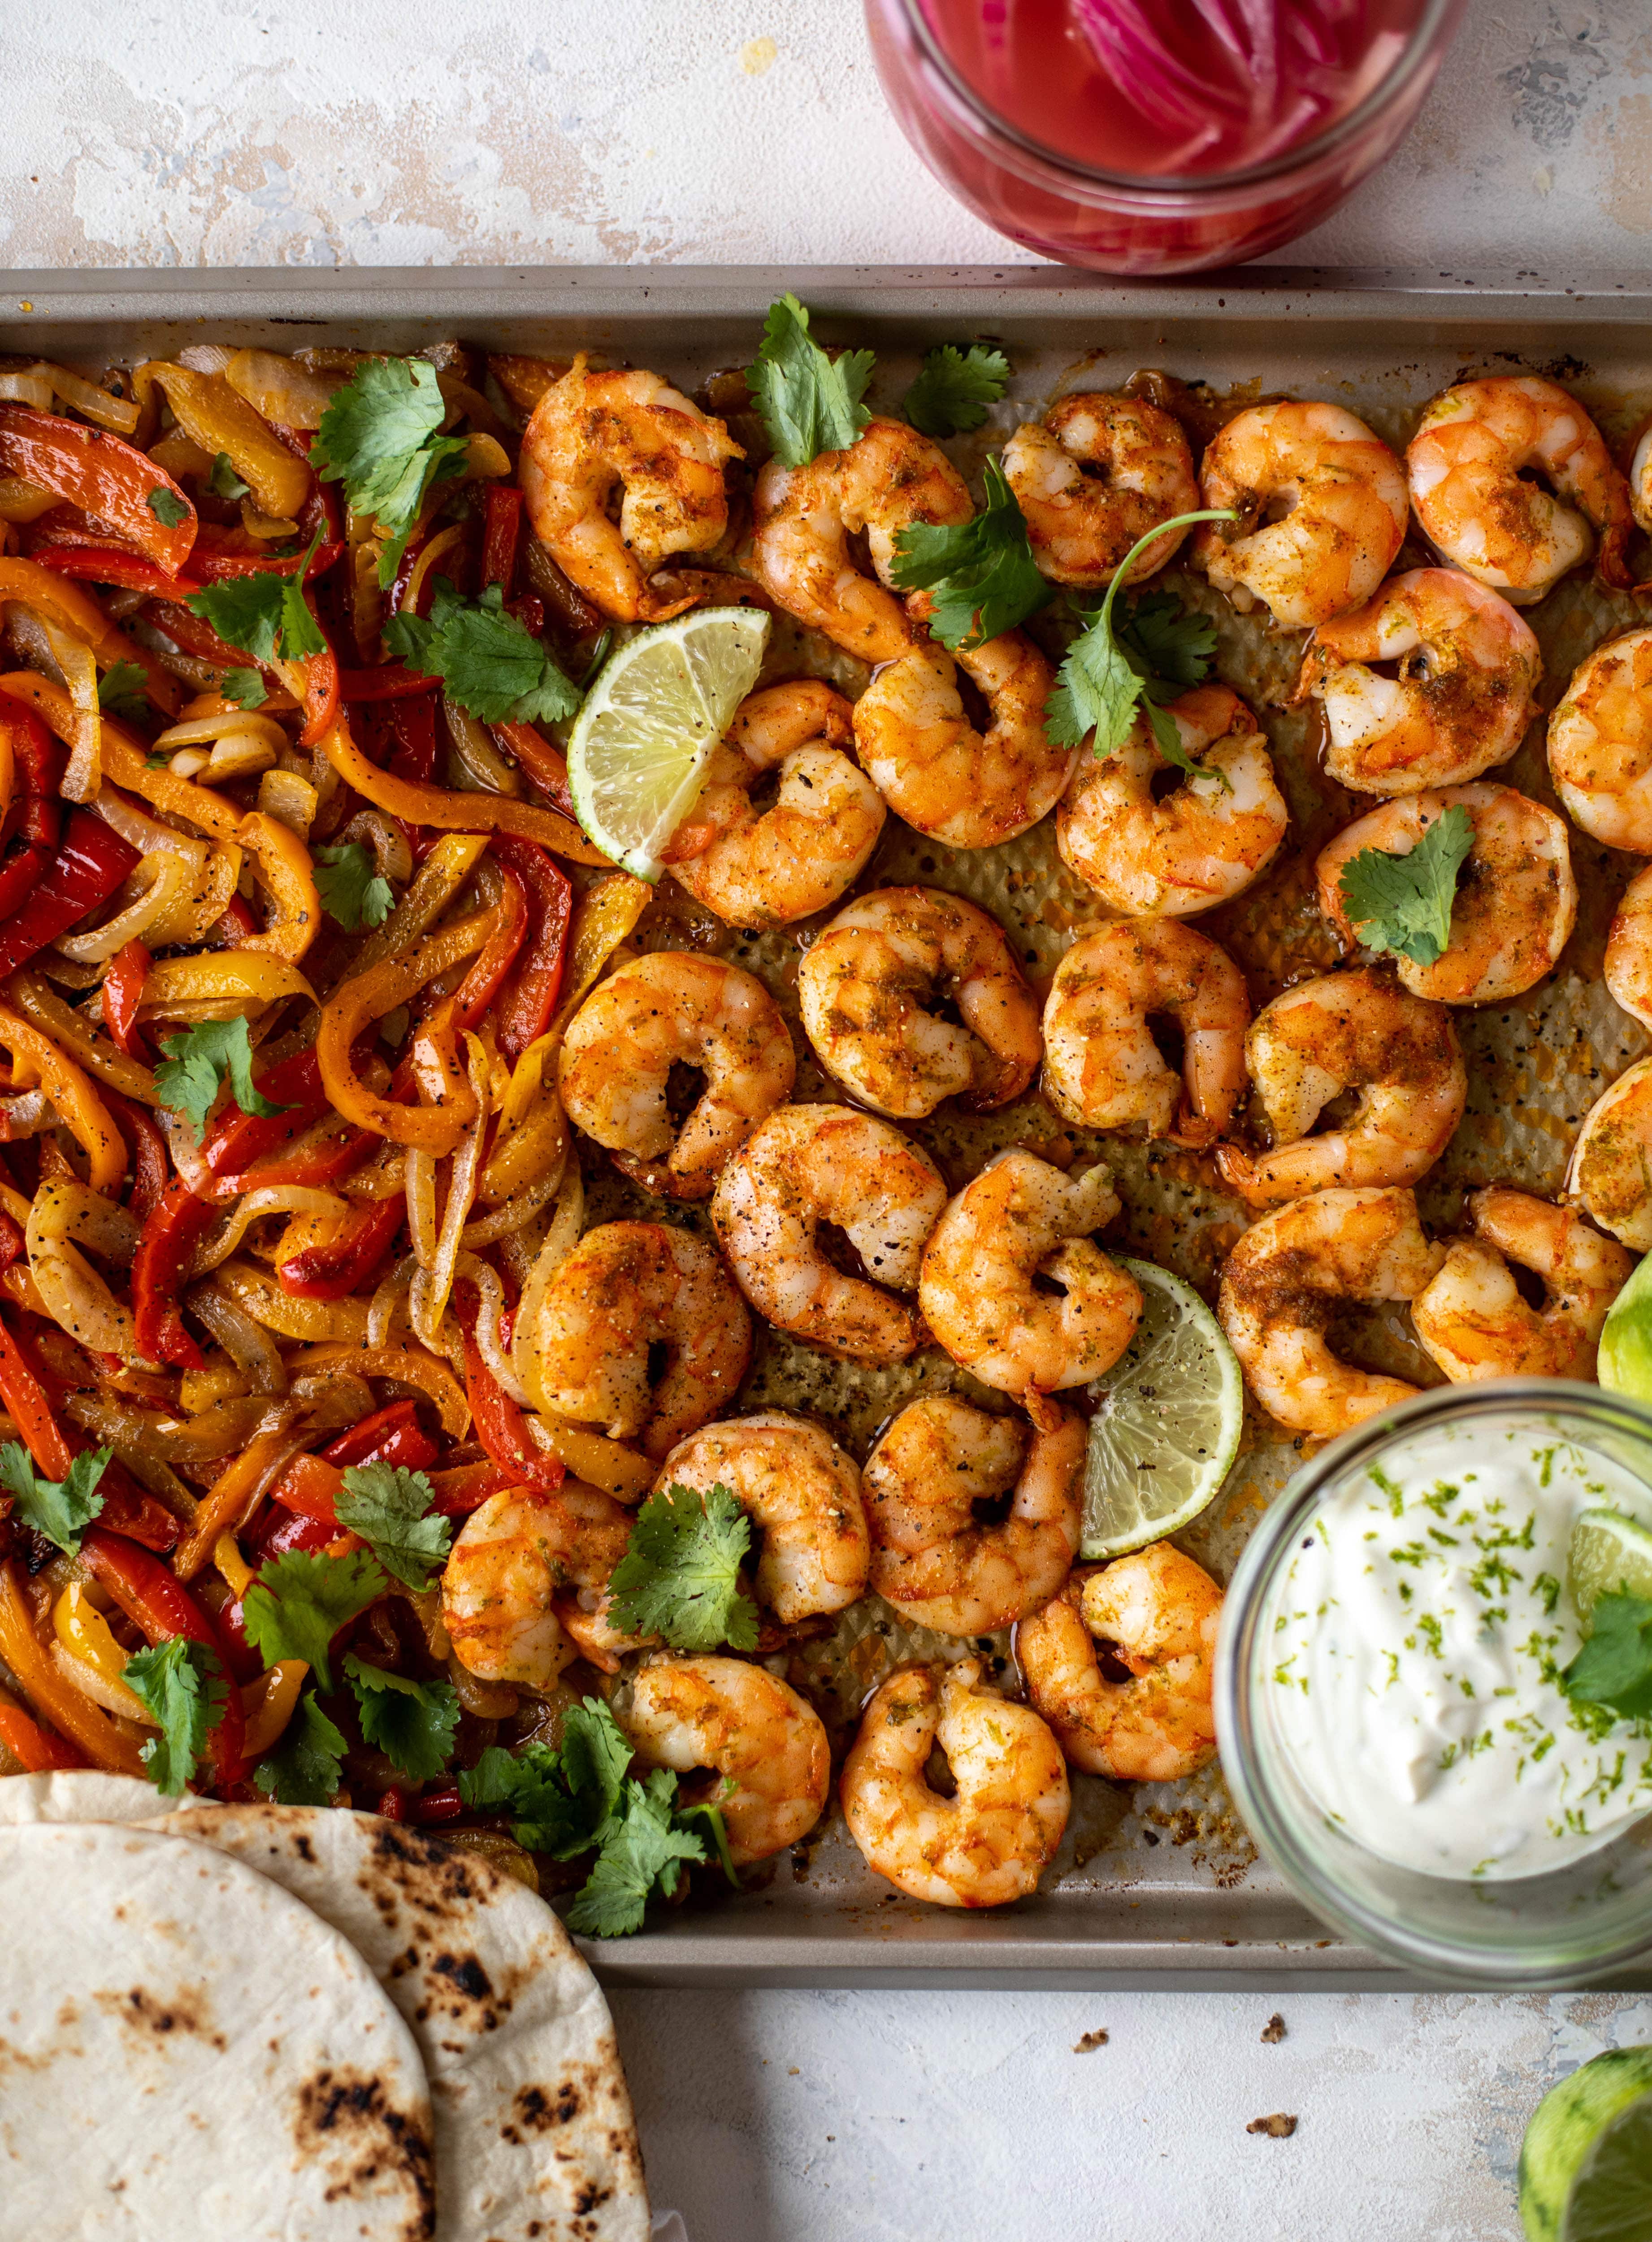 These lime sheet pan shrimp fajitas are the best weeknight meal! Make everything on the sheet pan and serve in warm tortillas. Delicious!